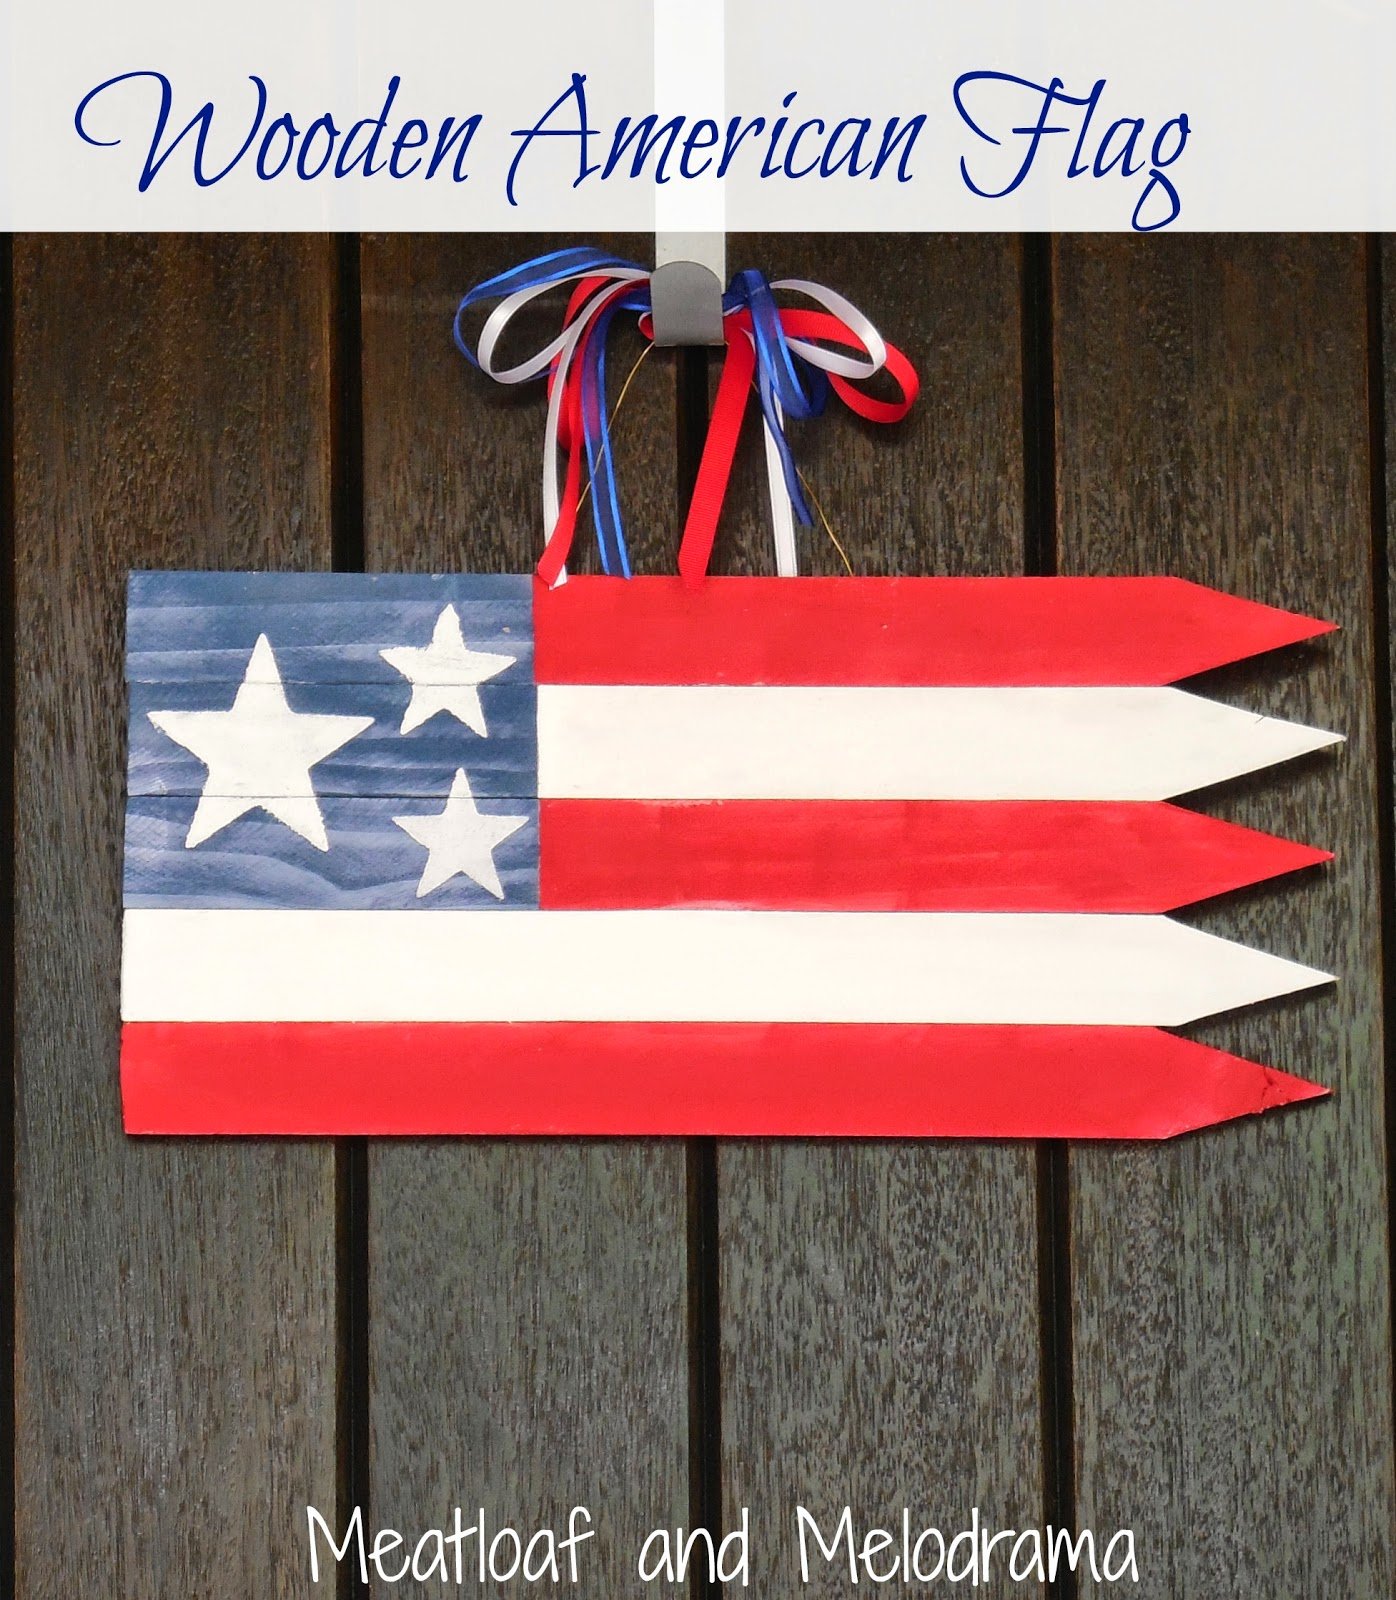 American flag made from wood fence posts